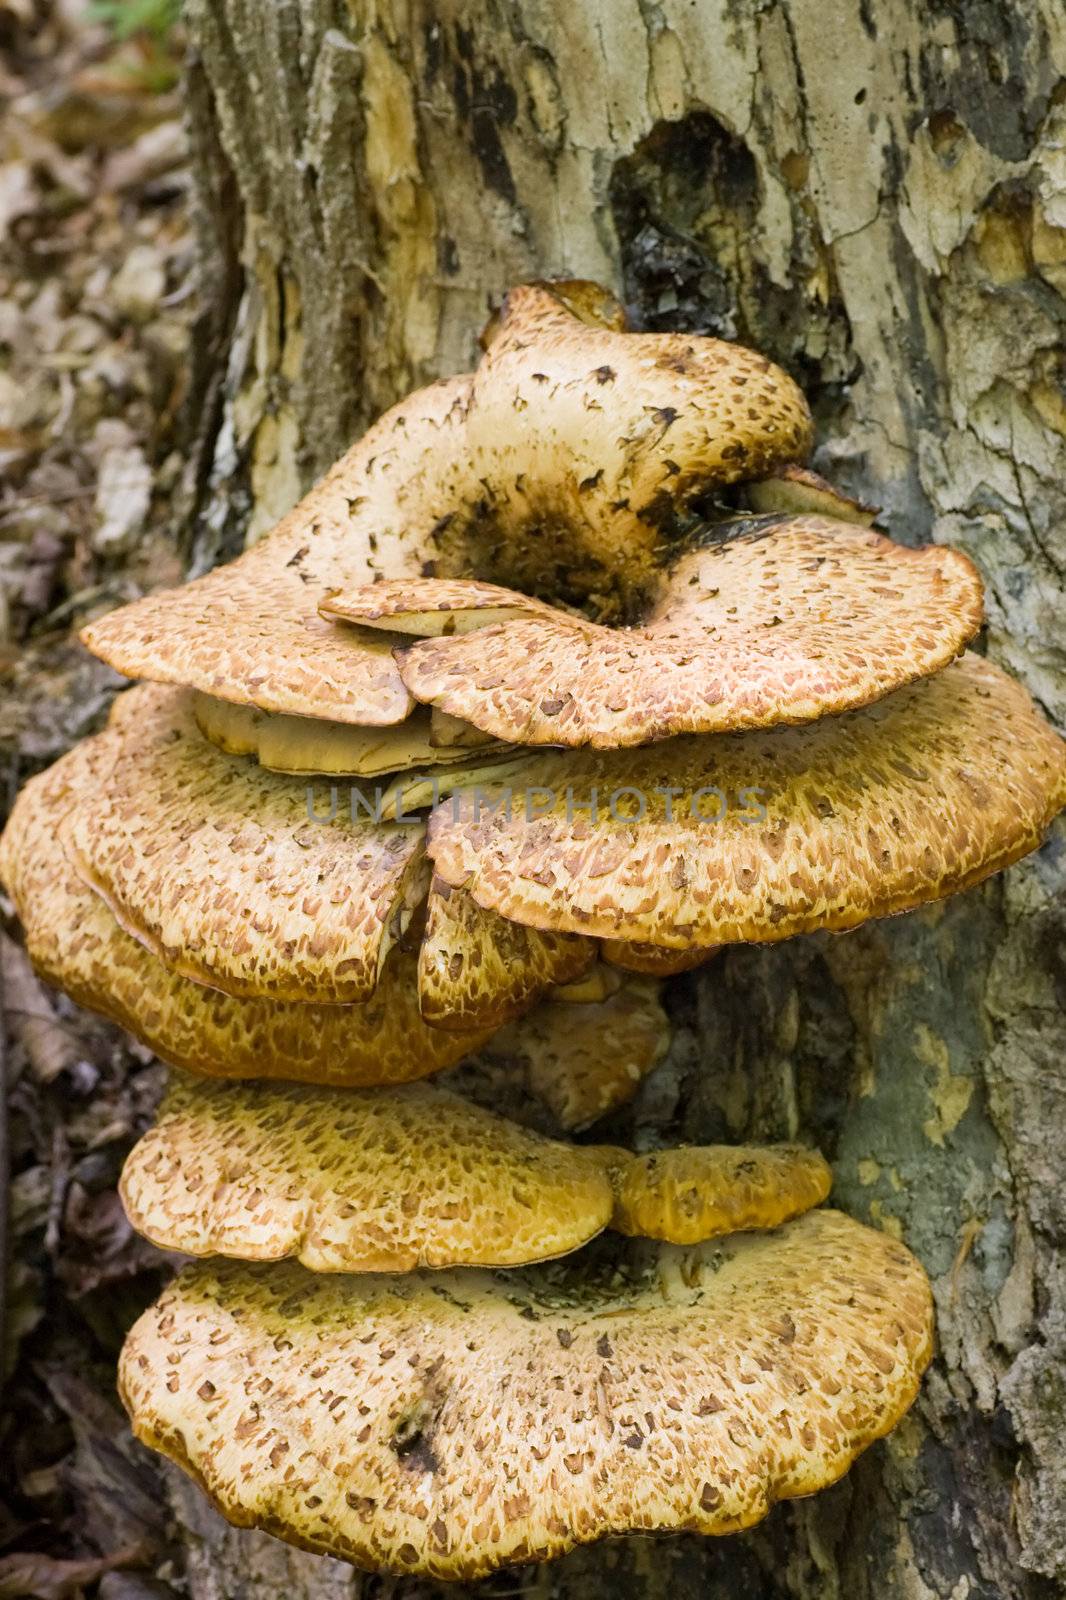 Closeup of a mushroom or fungus growing on the trunk of a tree.